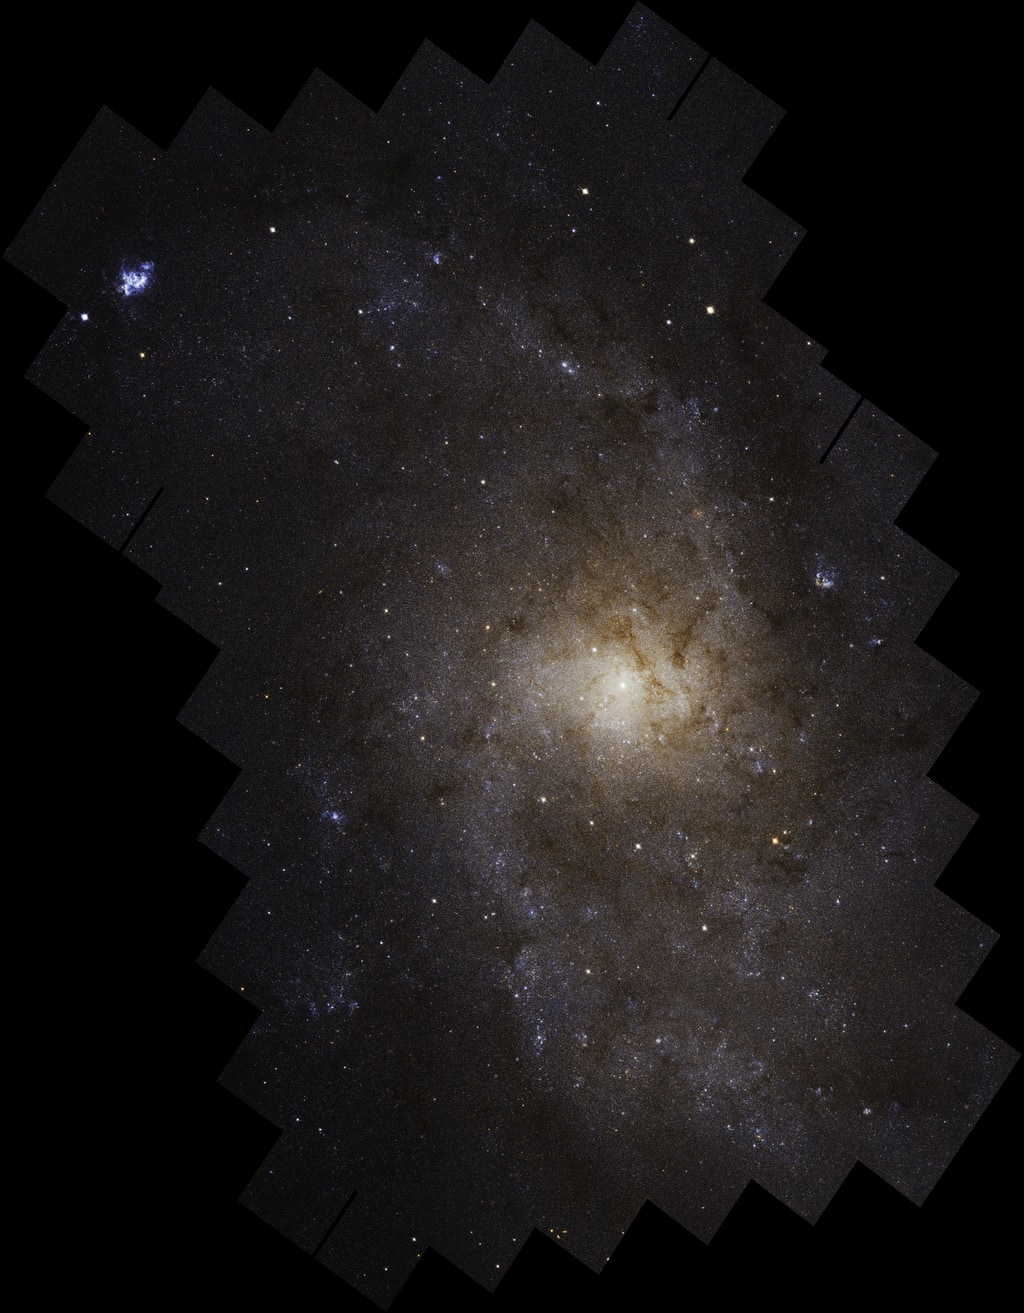 Preview Image for Triangulum Galaxy Mosaic